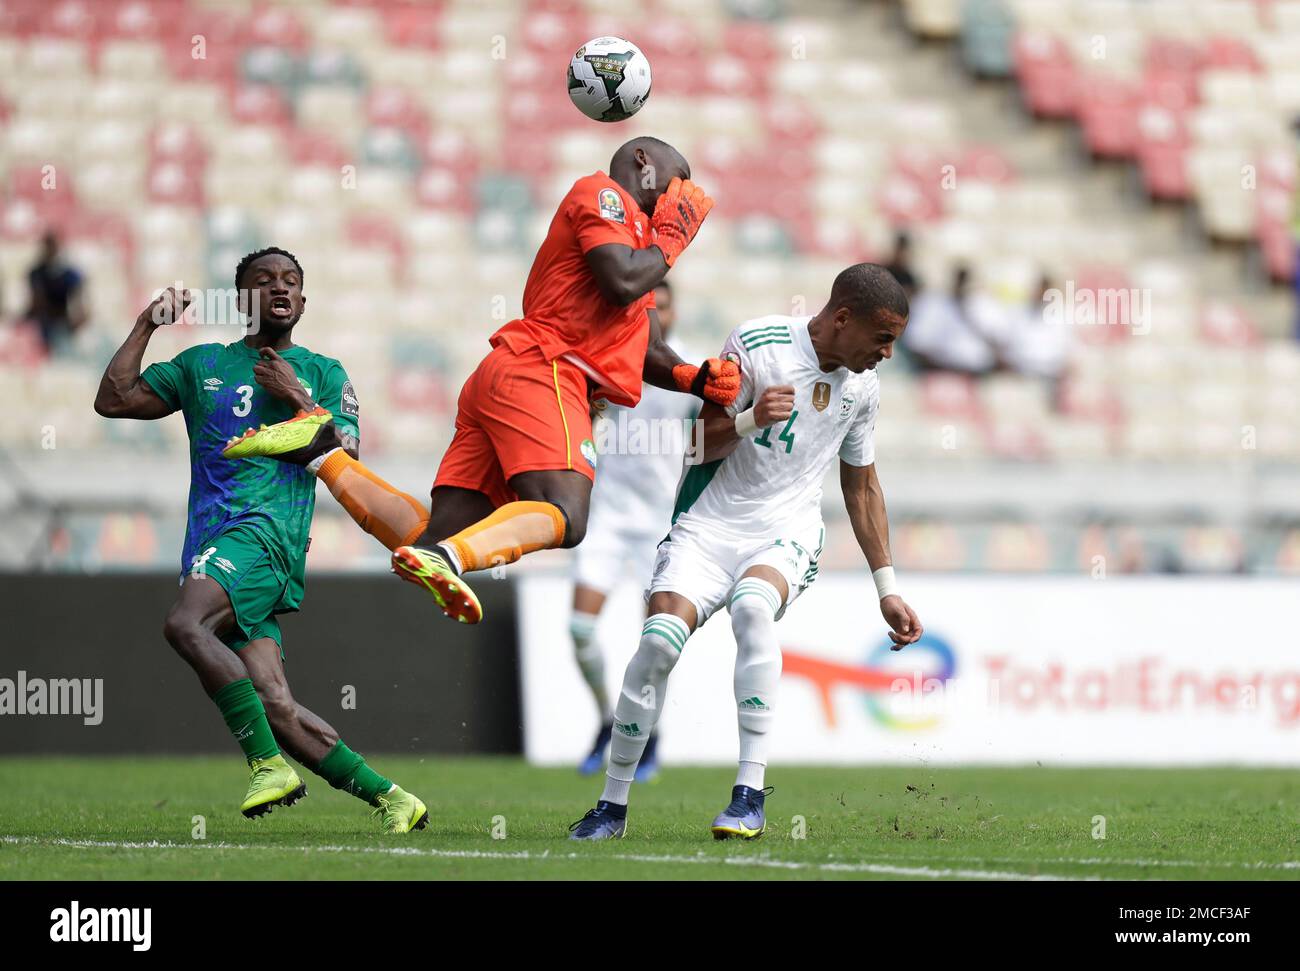 Sierra Leone's goalkeeper Mohamed Kamara, center, heads the ball past  Algeria's Sofiane Bendebka, right, during the African Cup of Nations 2022  group E soccer match between Algeria and Sierra Leone at the